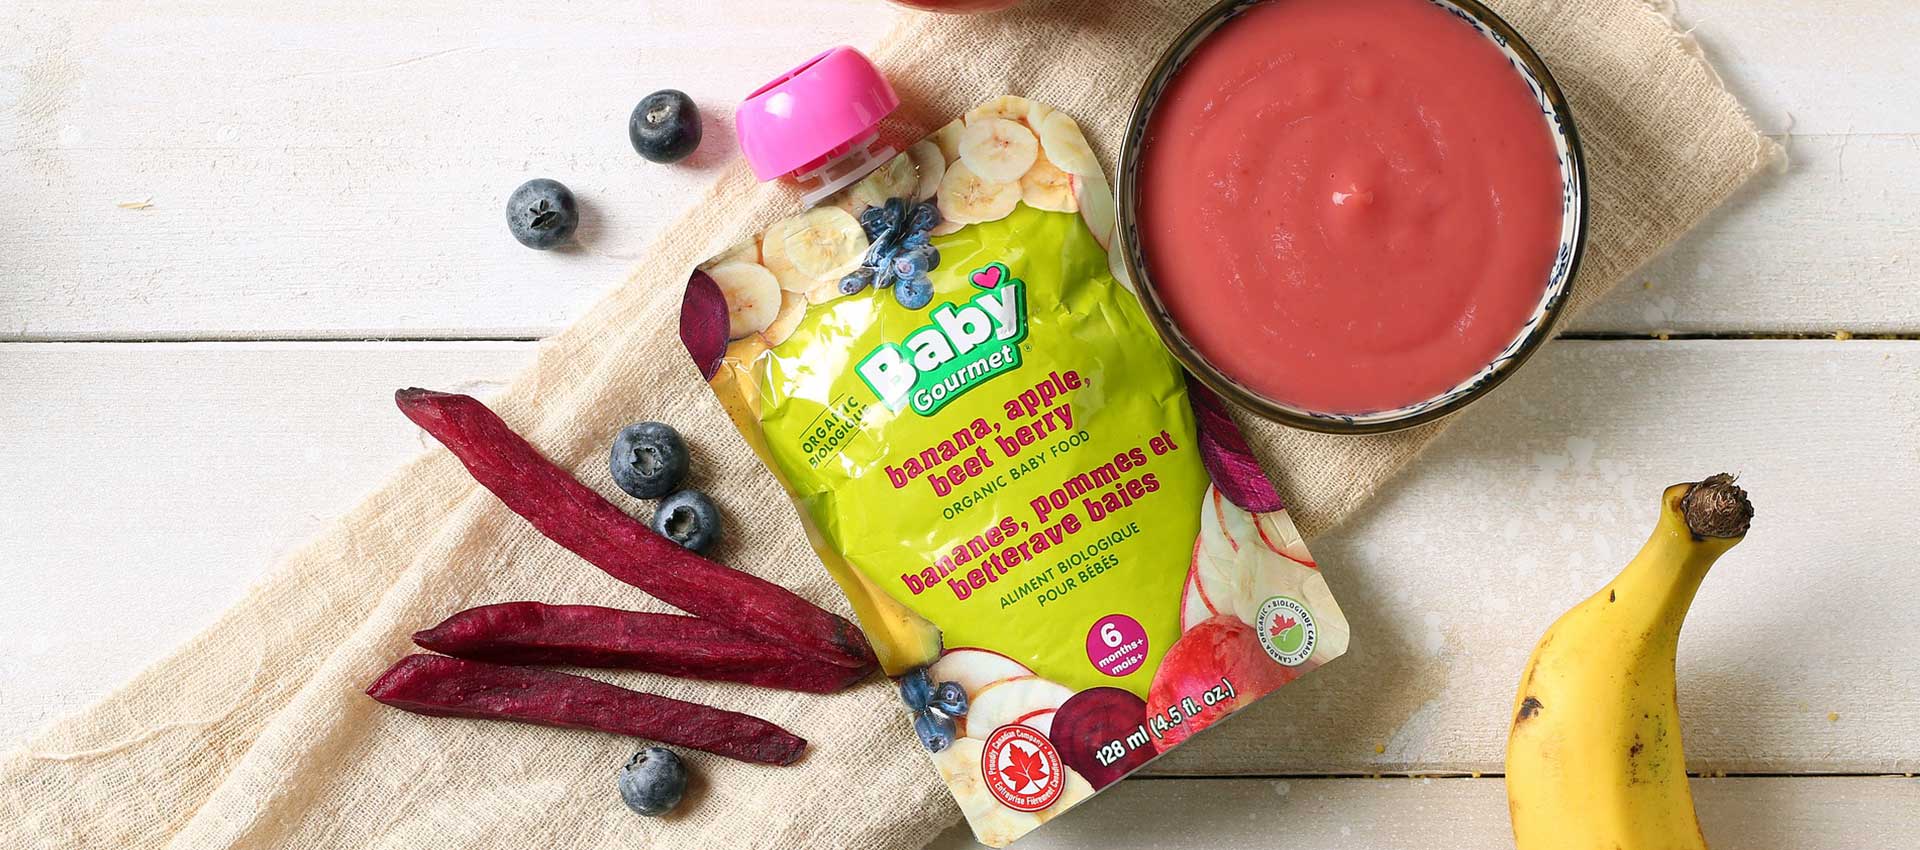 10 Baby Food Brands In Pakistan You Must Know About To Feed Your Baby A Healthy And Safe Diet